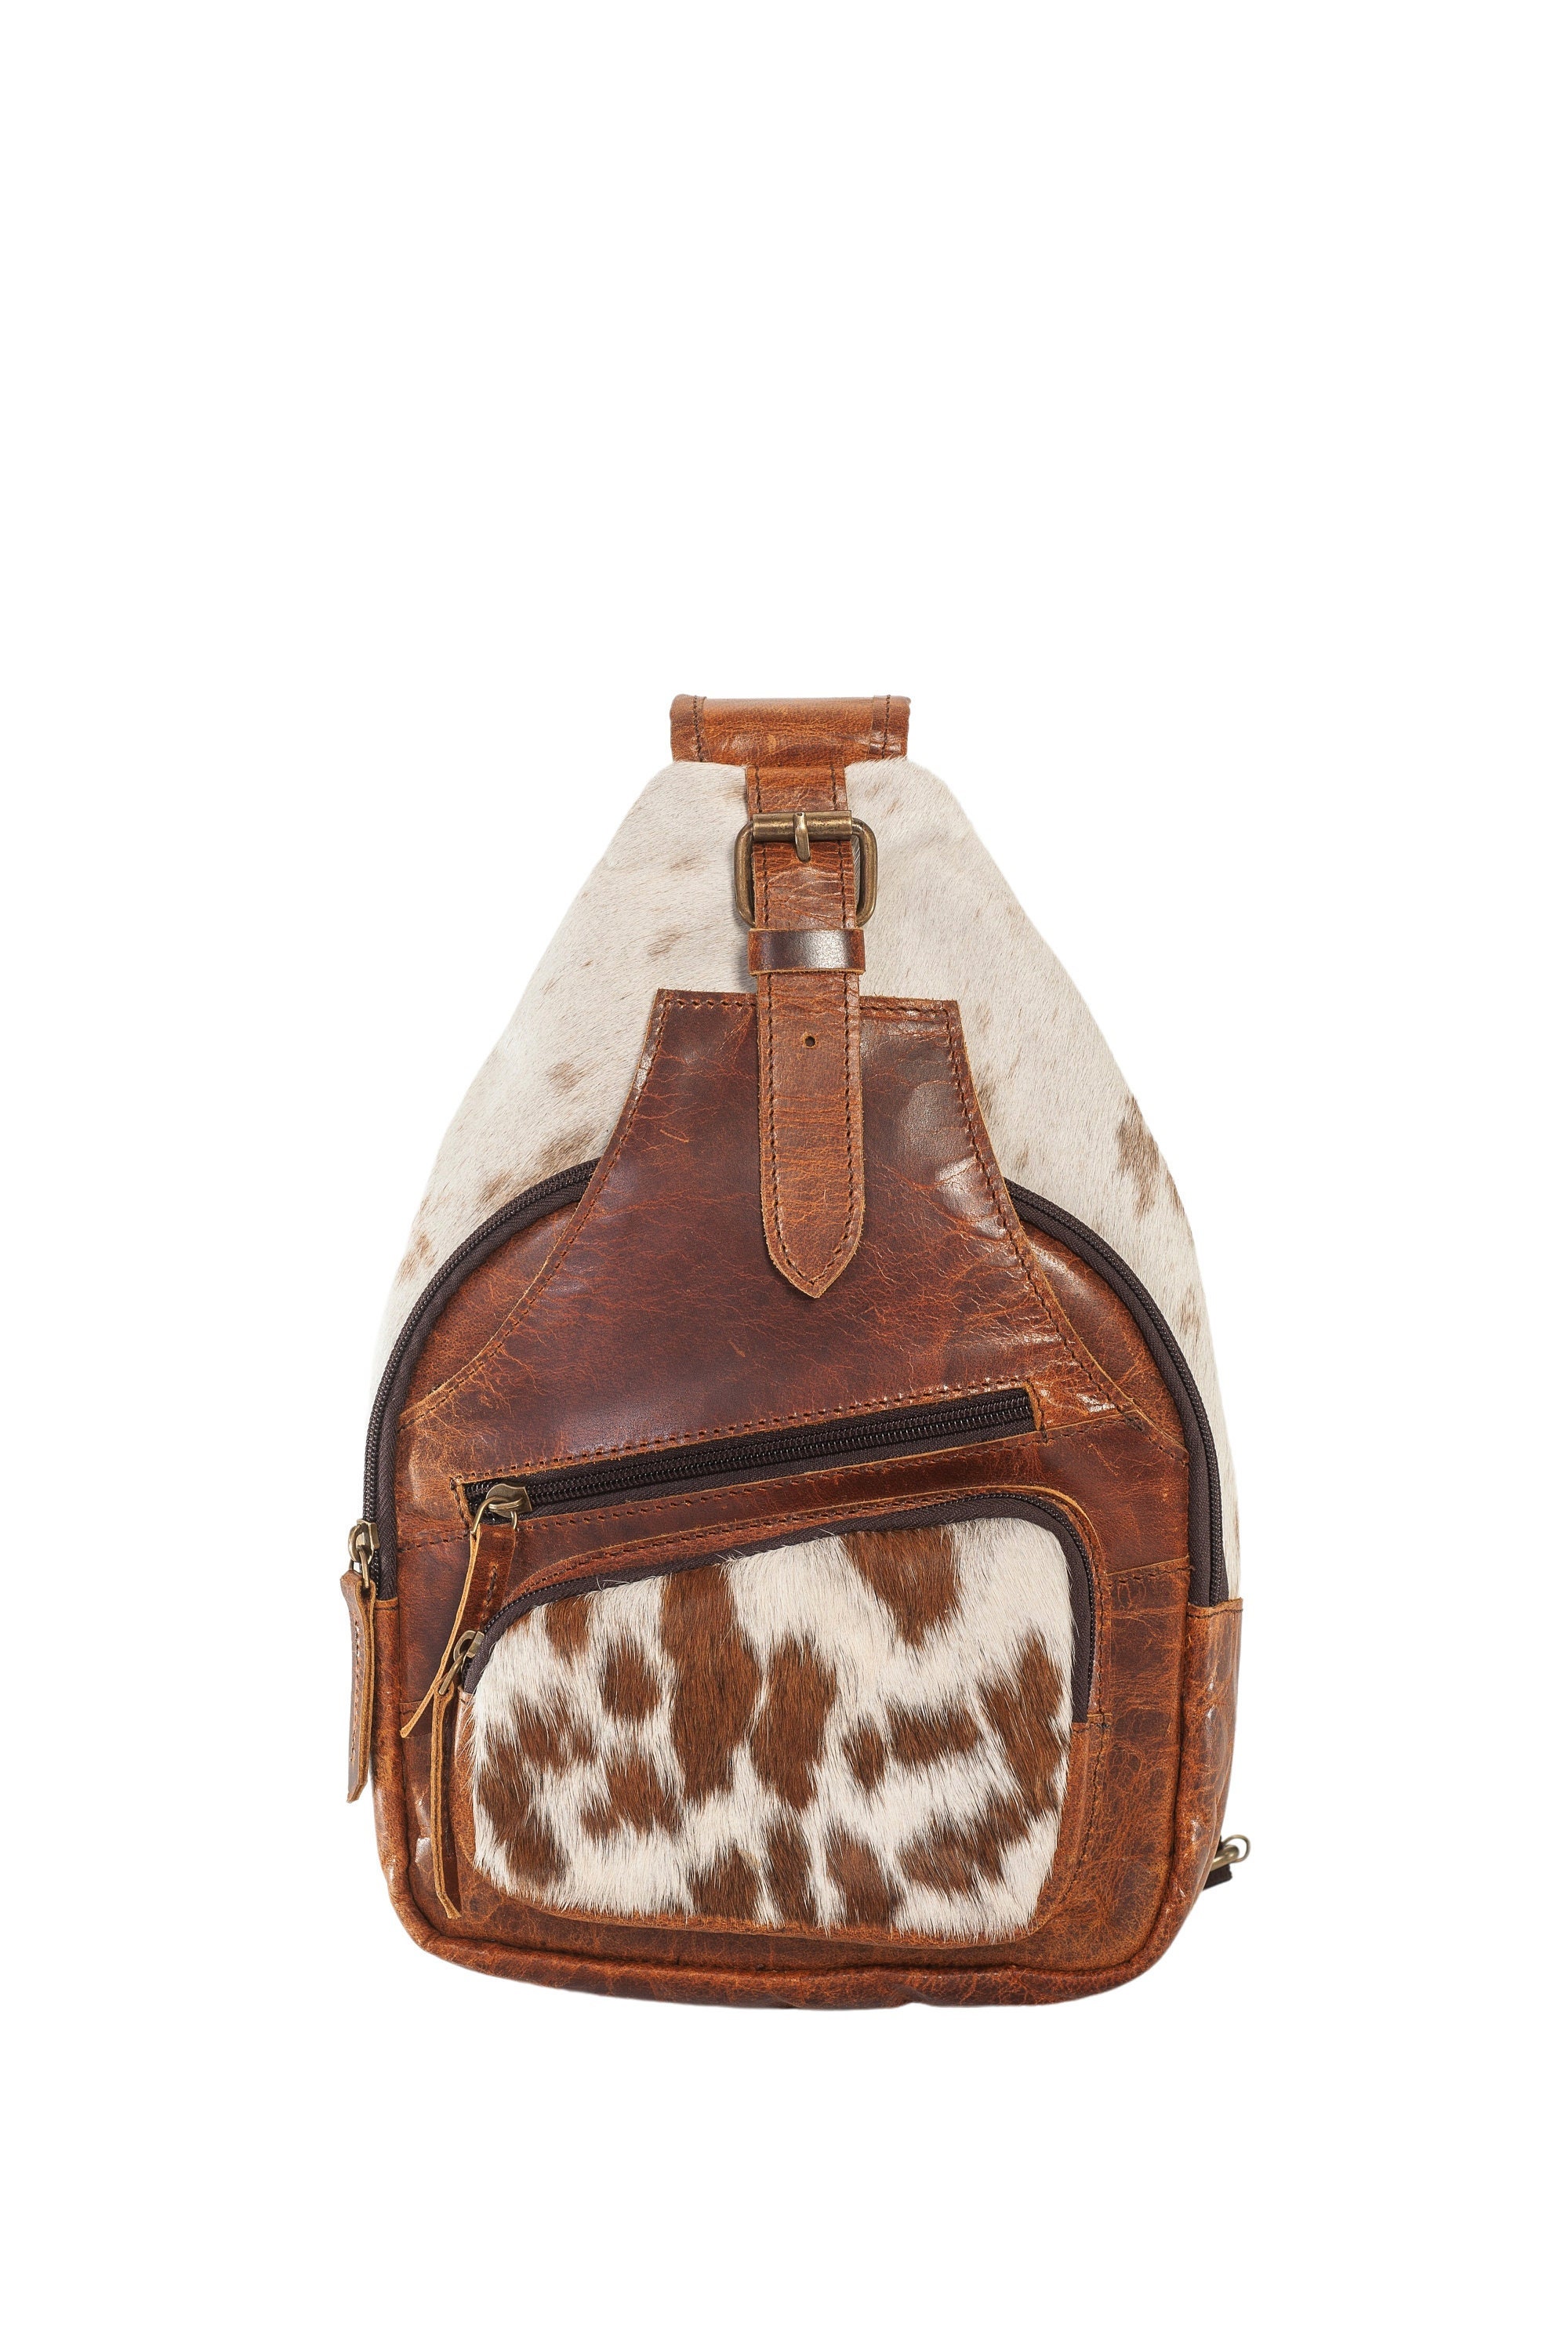 Bourbon Pull up Natural Grain Cowhide Leather Genuine Cow Leather